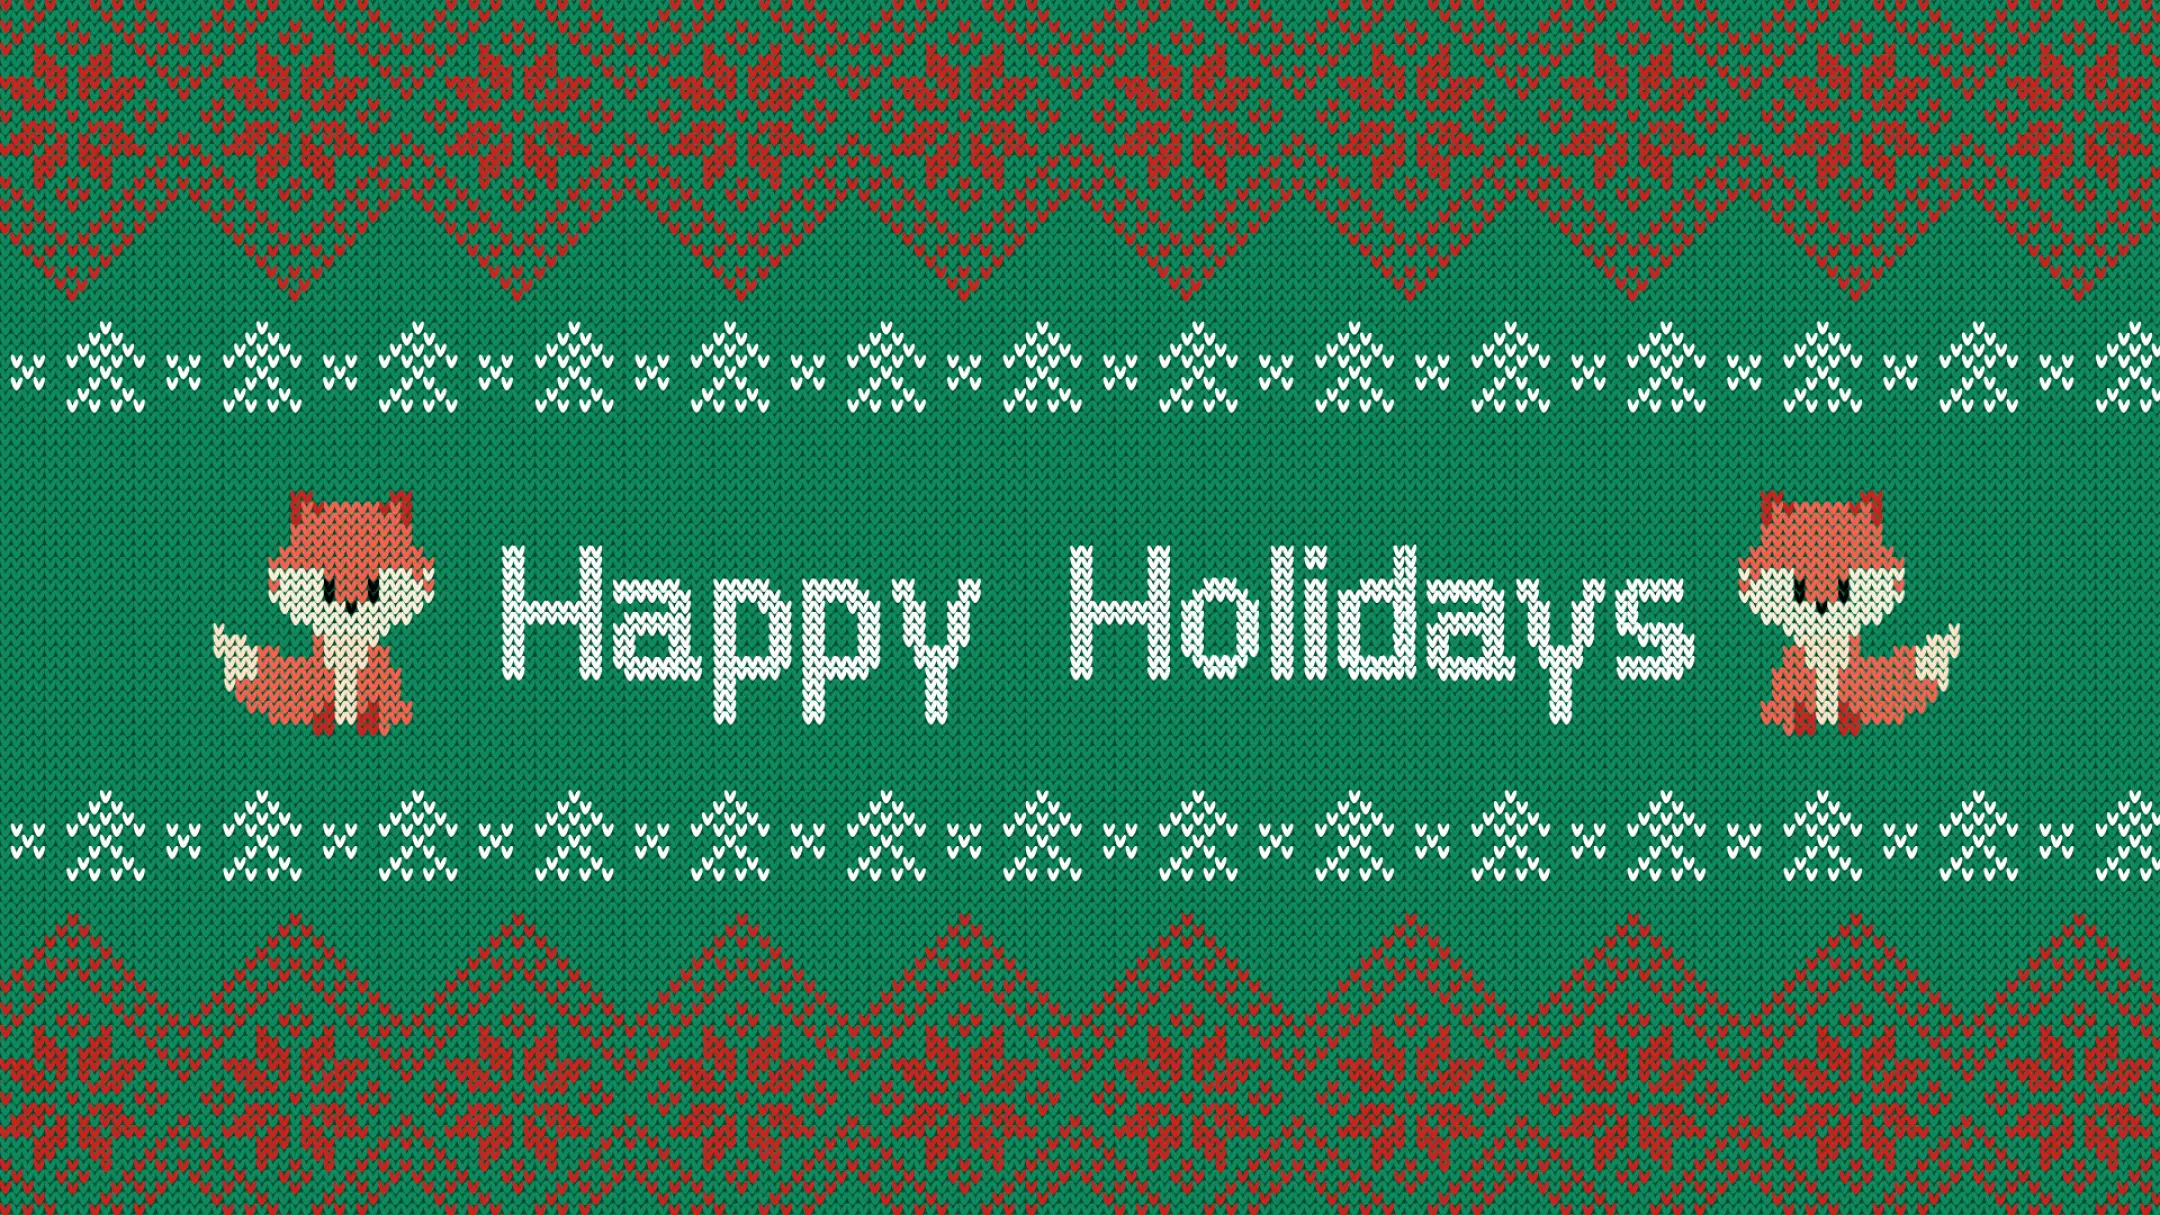 Happy Holidays image - in a sweater pattern